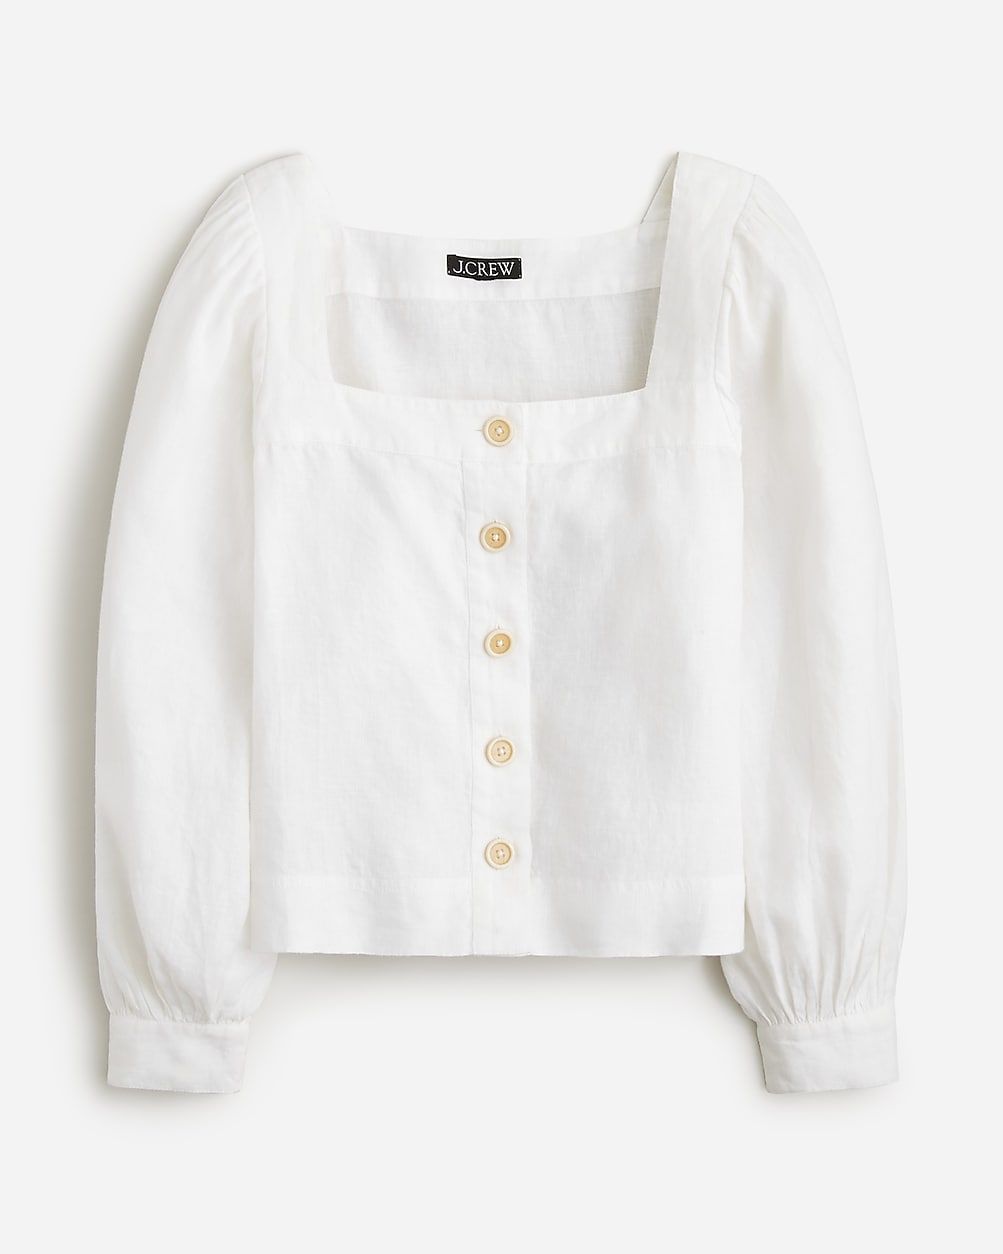 best seller4.2(45 REVIEWS)Squareneck button-up top in linen$62.50-$82.99$98.00Limited time. Price... | J.Crew US